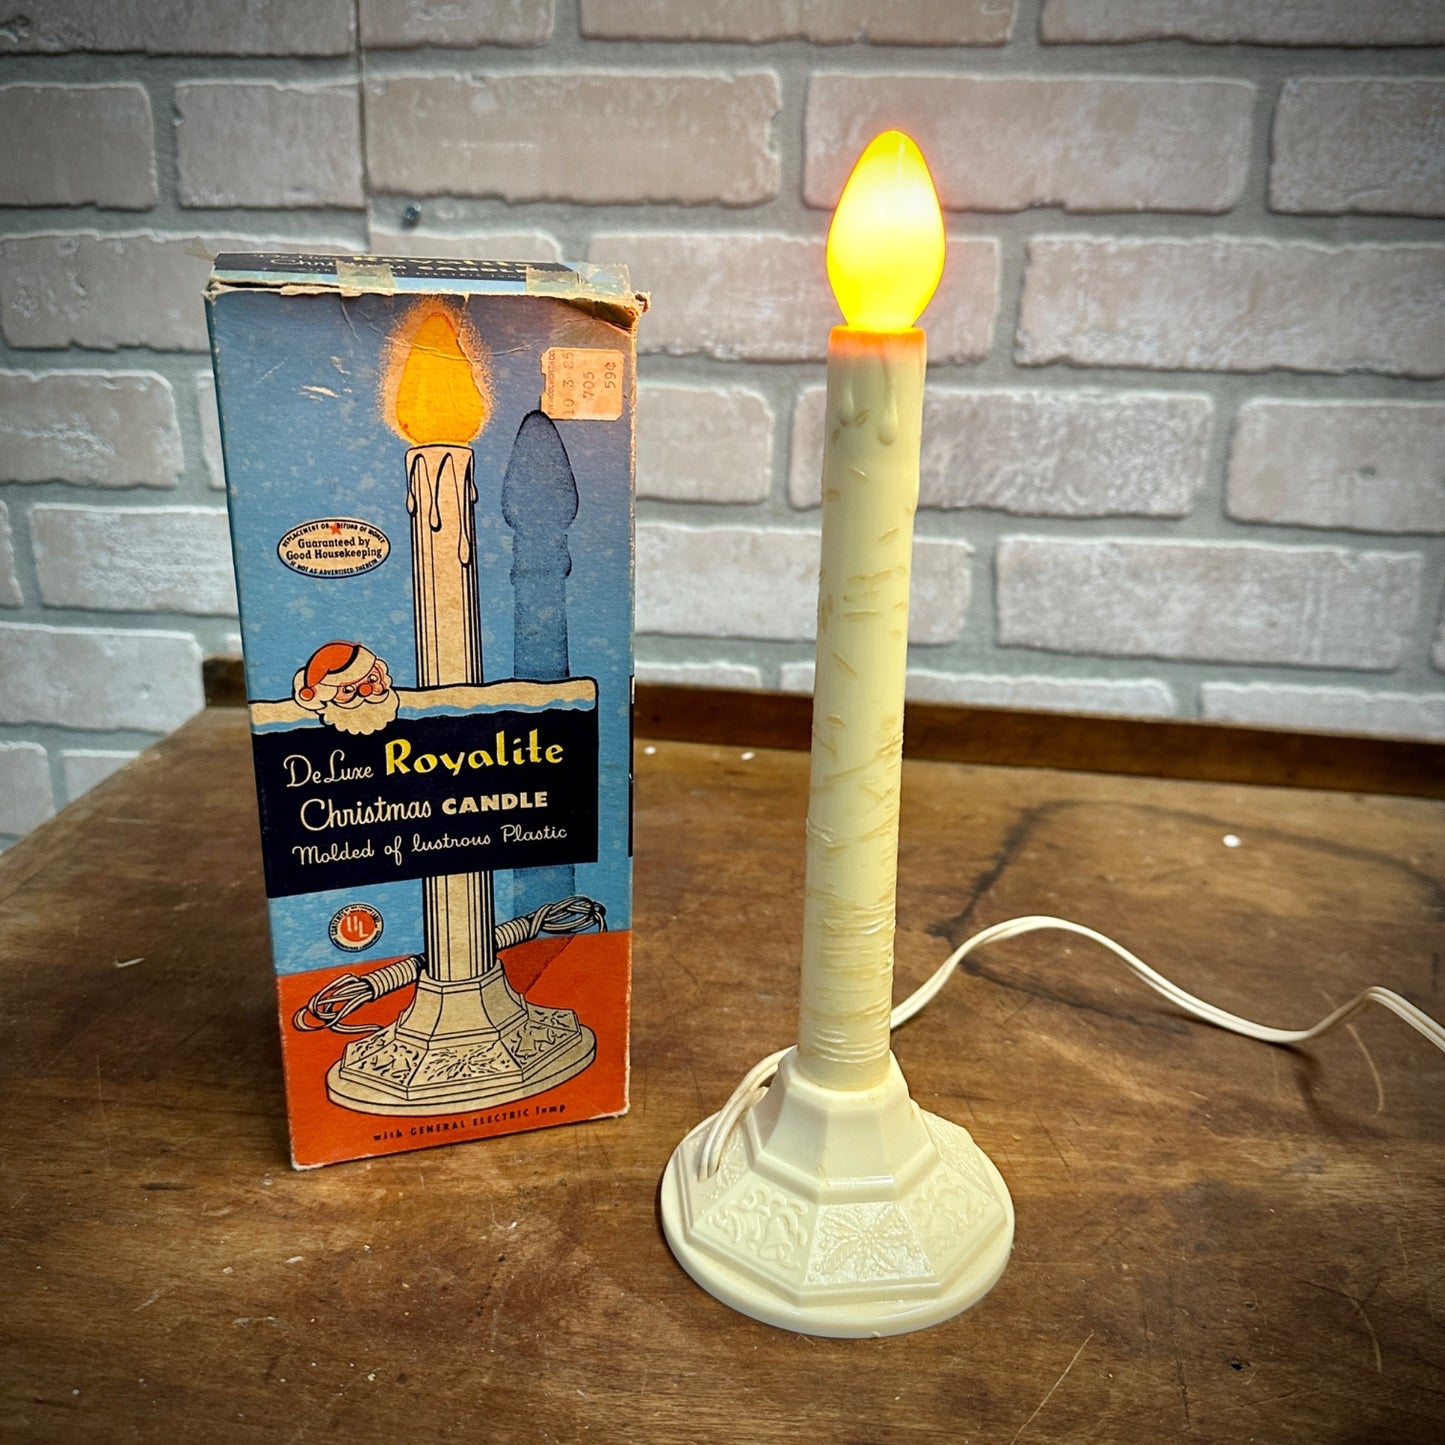 Vintage 1950s Deluxe Royalite Christmas Candle Electric Lighted w/ Box - Works